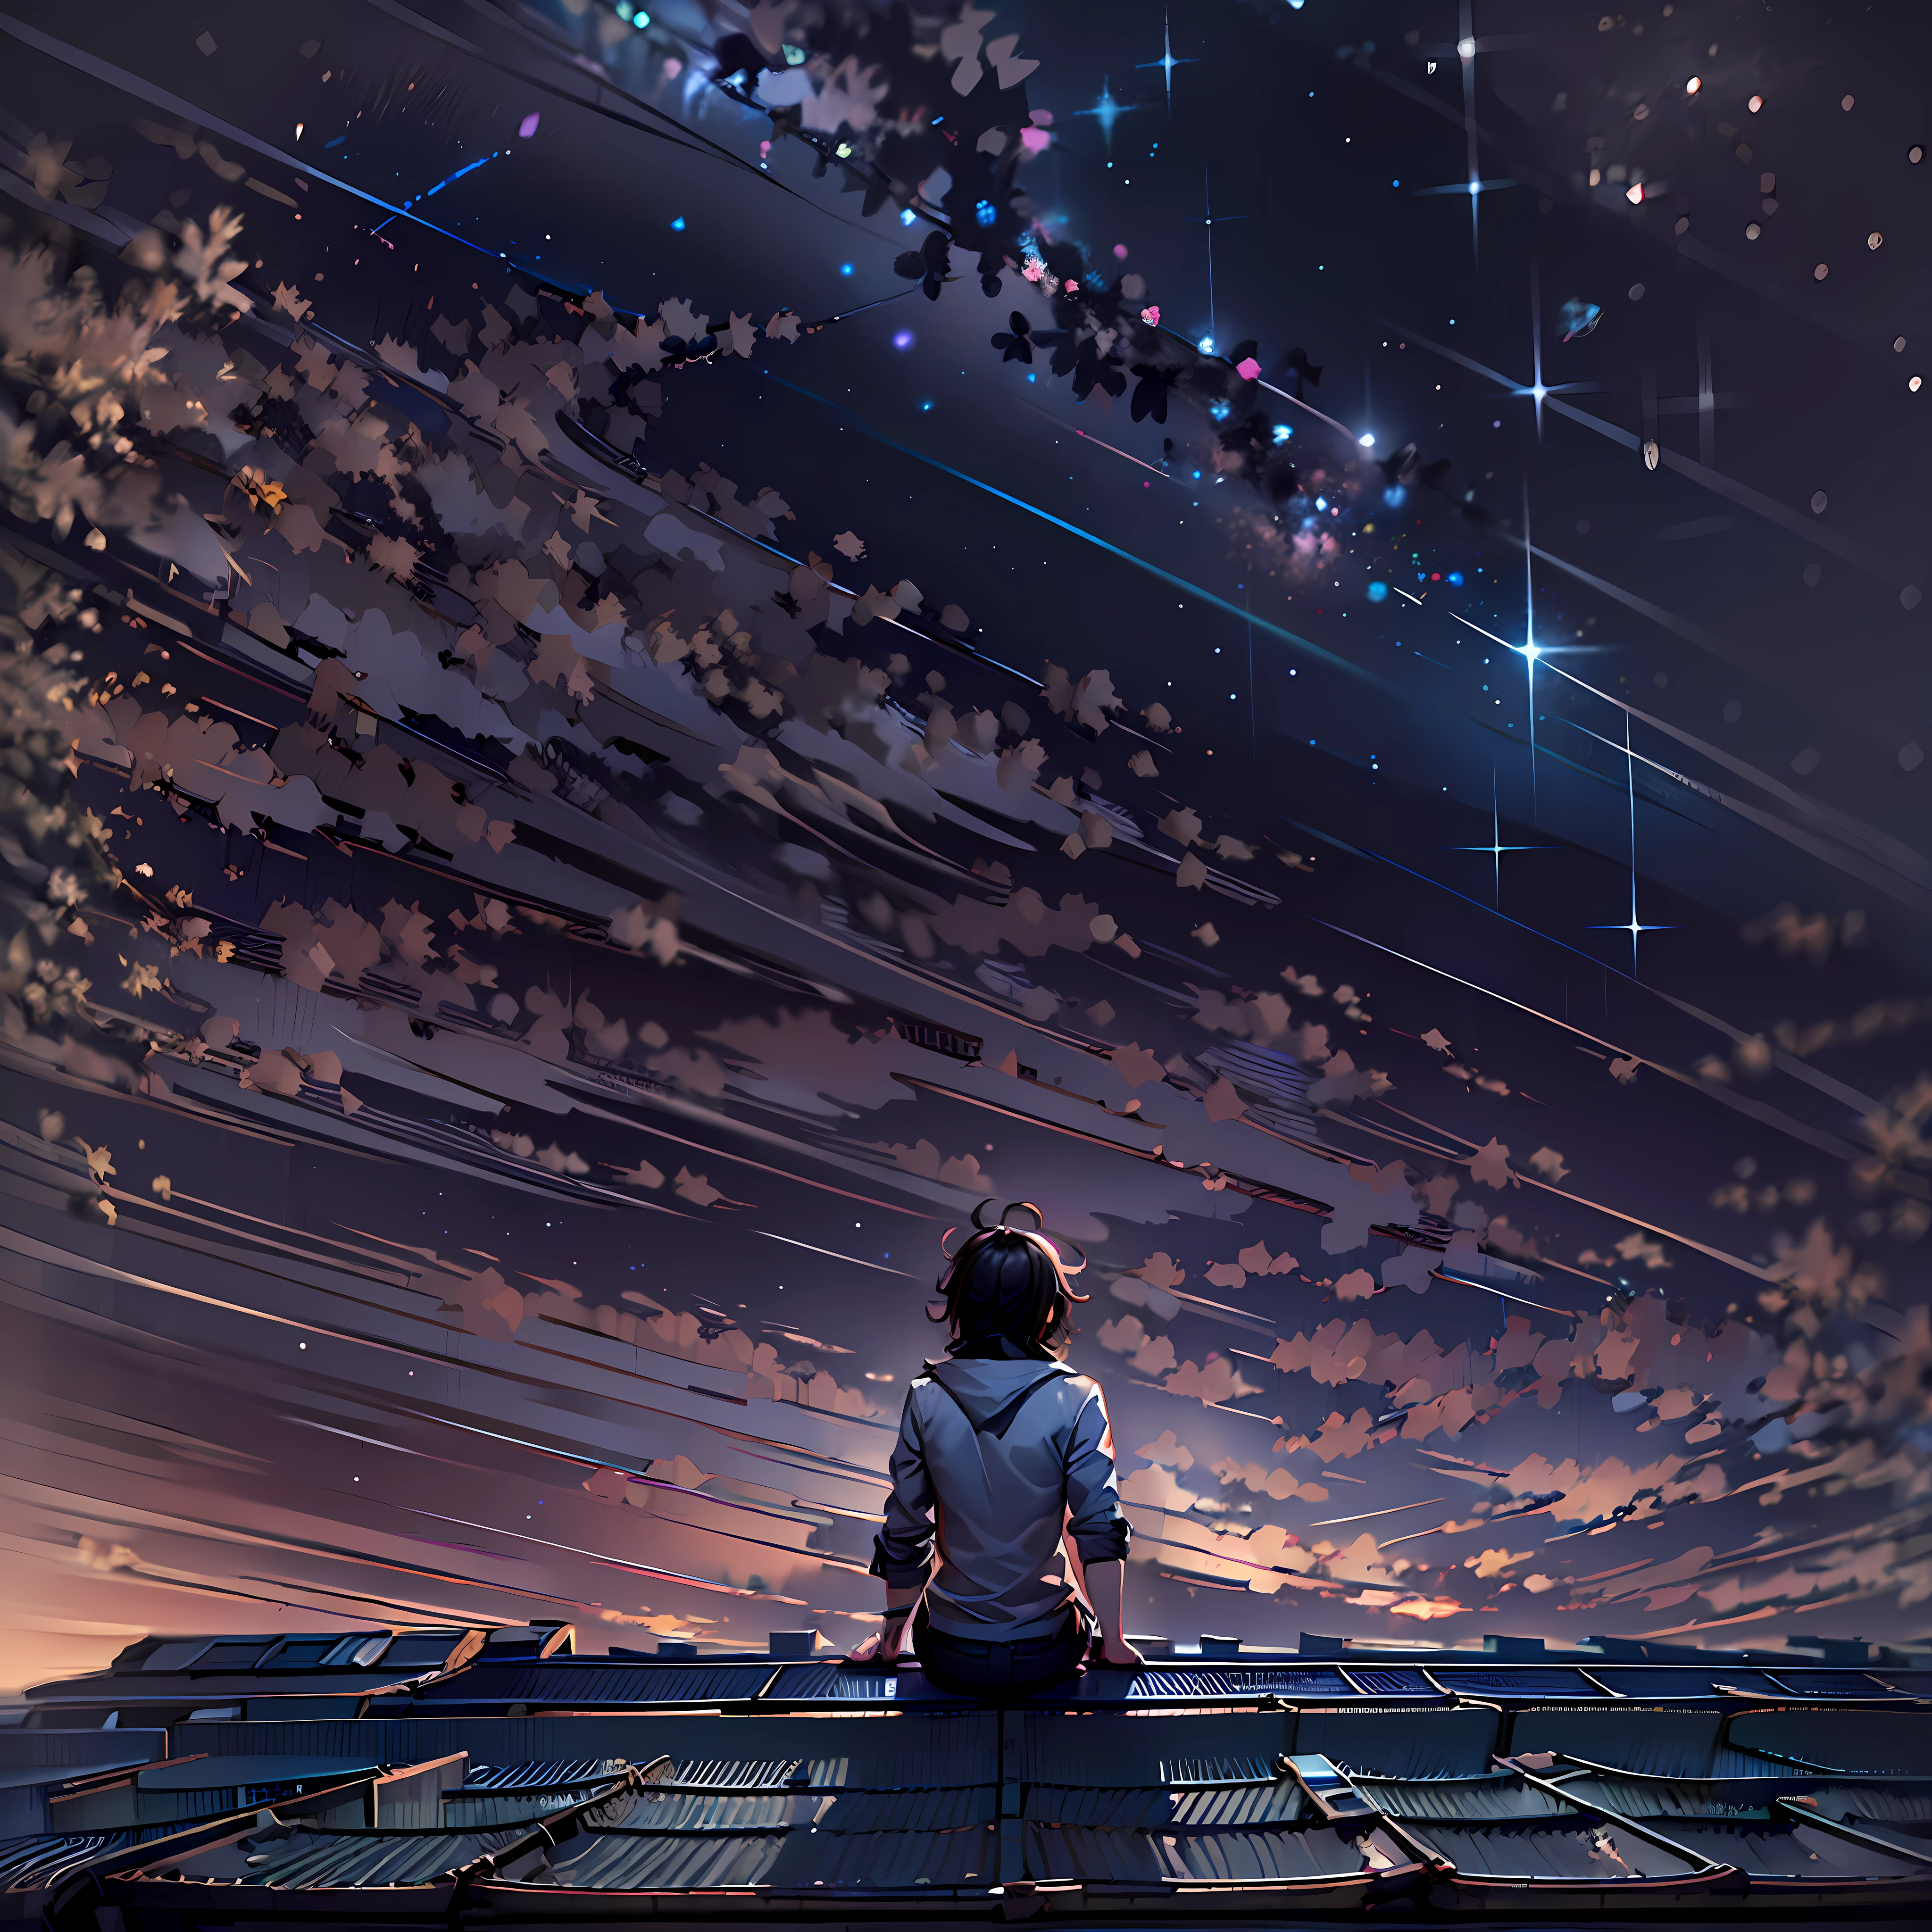 Backview of a doctor boy sitting in the top of a roof. octans, sky, star (sky), scenery, starry sky, night, night sky, solo, outdoors, building, cloud, milky way, sitting, tree, long hair, city, silhouette, cityscape. There are stars moon milky way in the sky. There